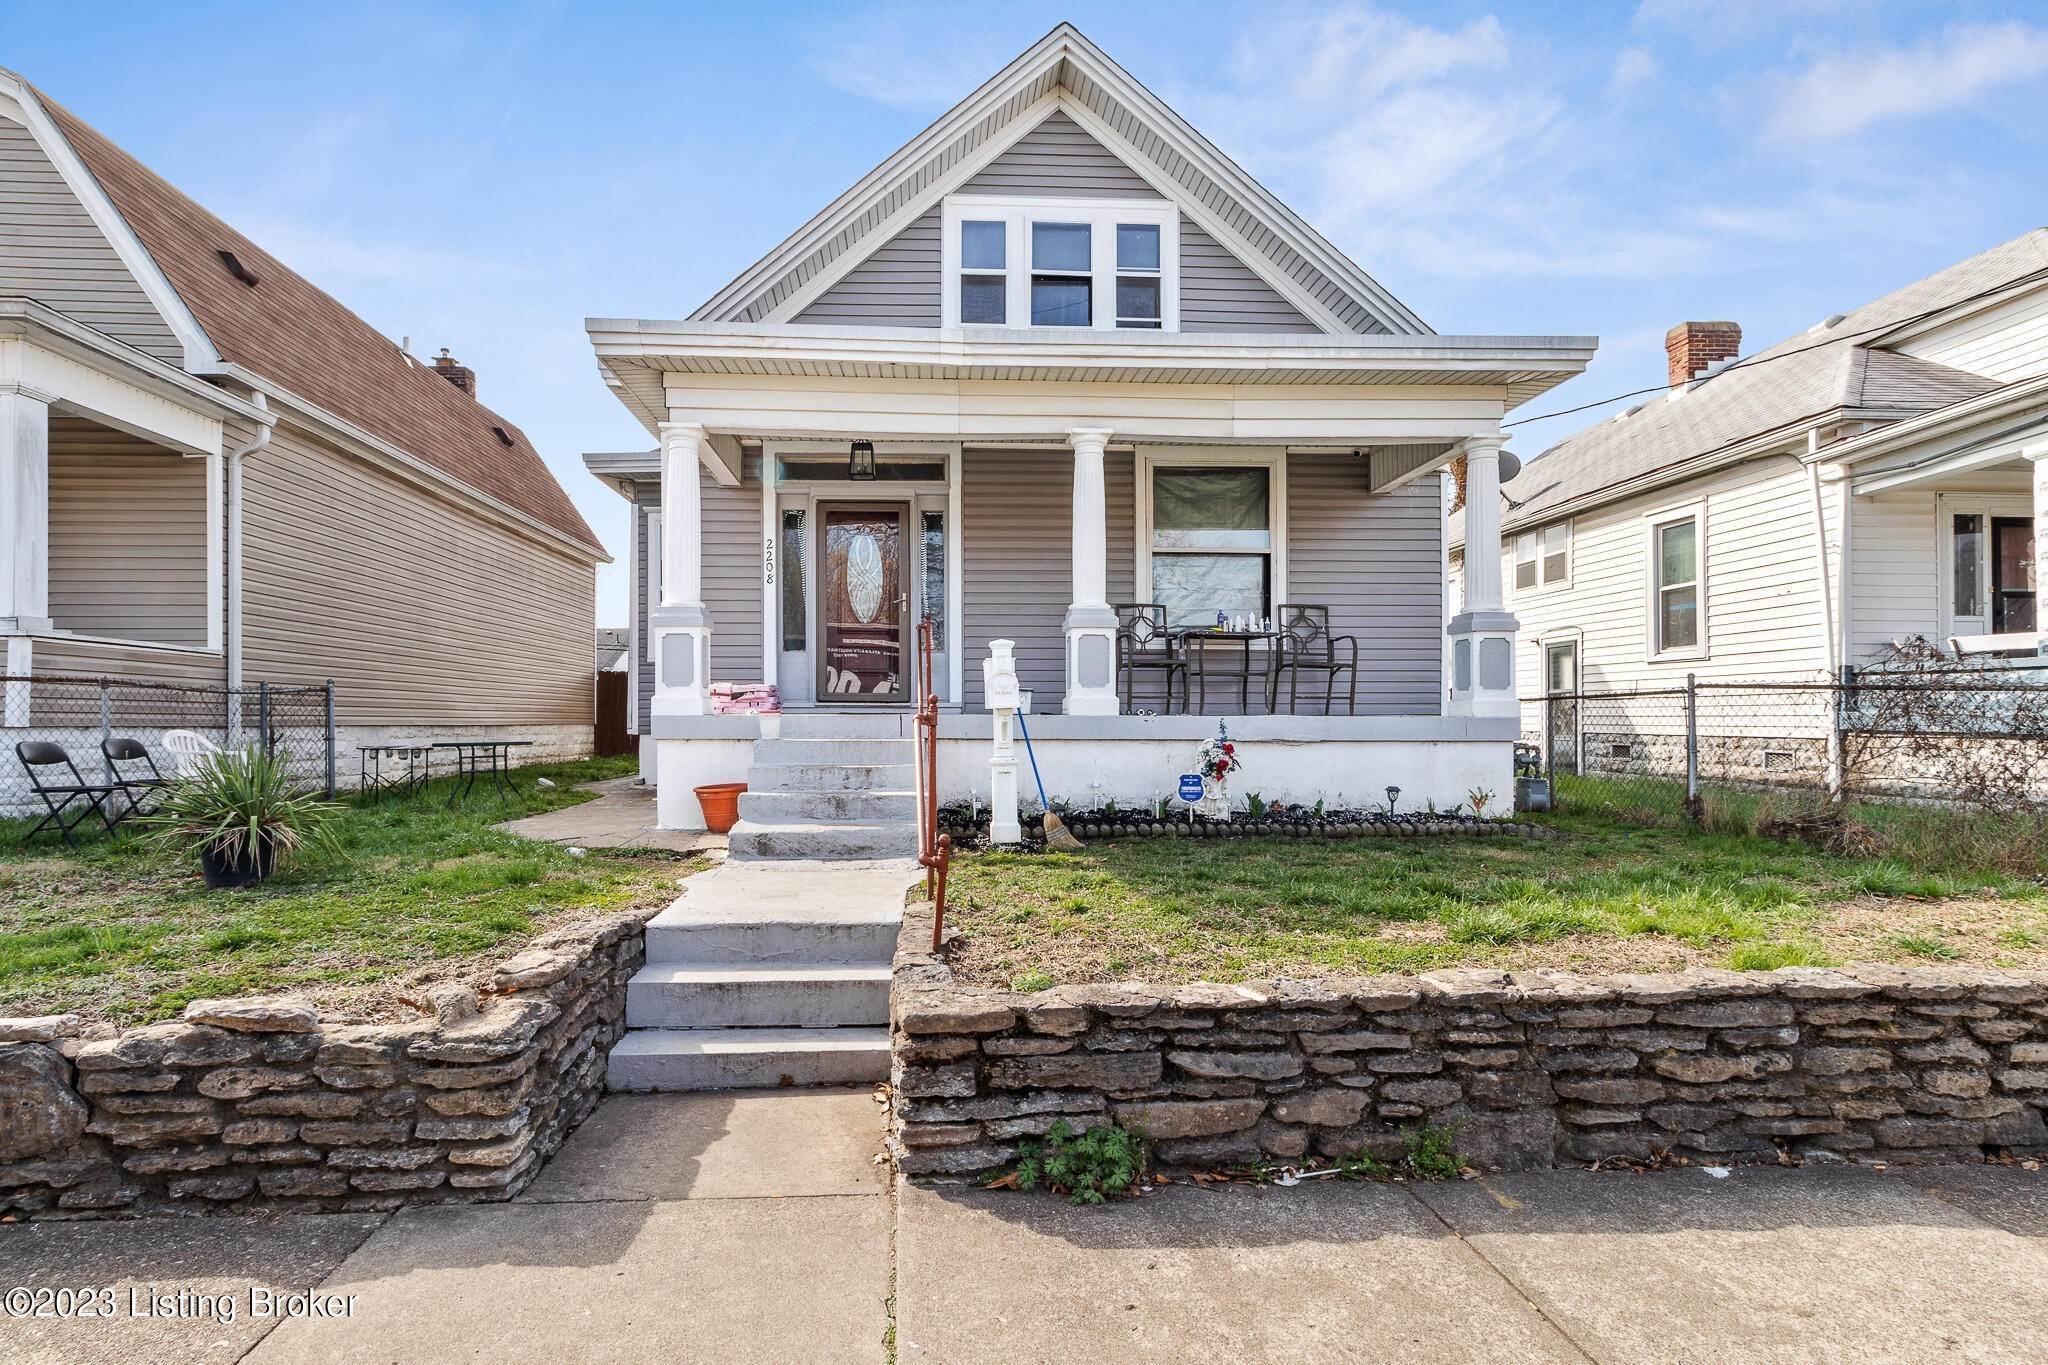 Single Family at Louisville, KY 40210